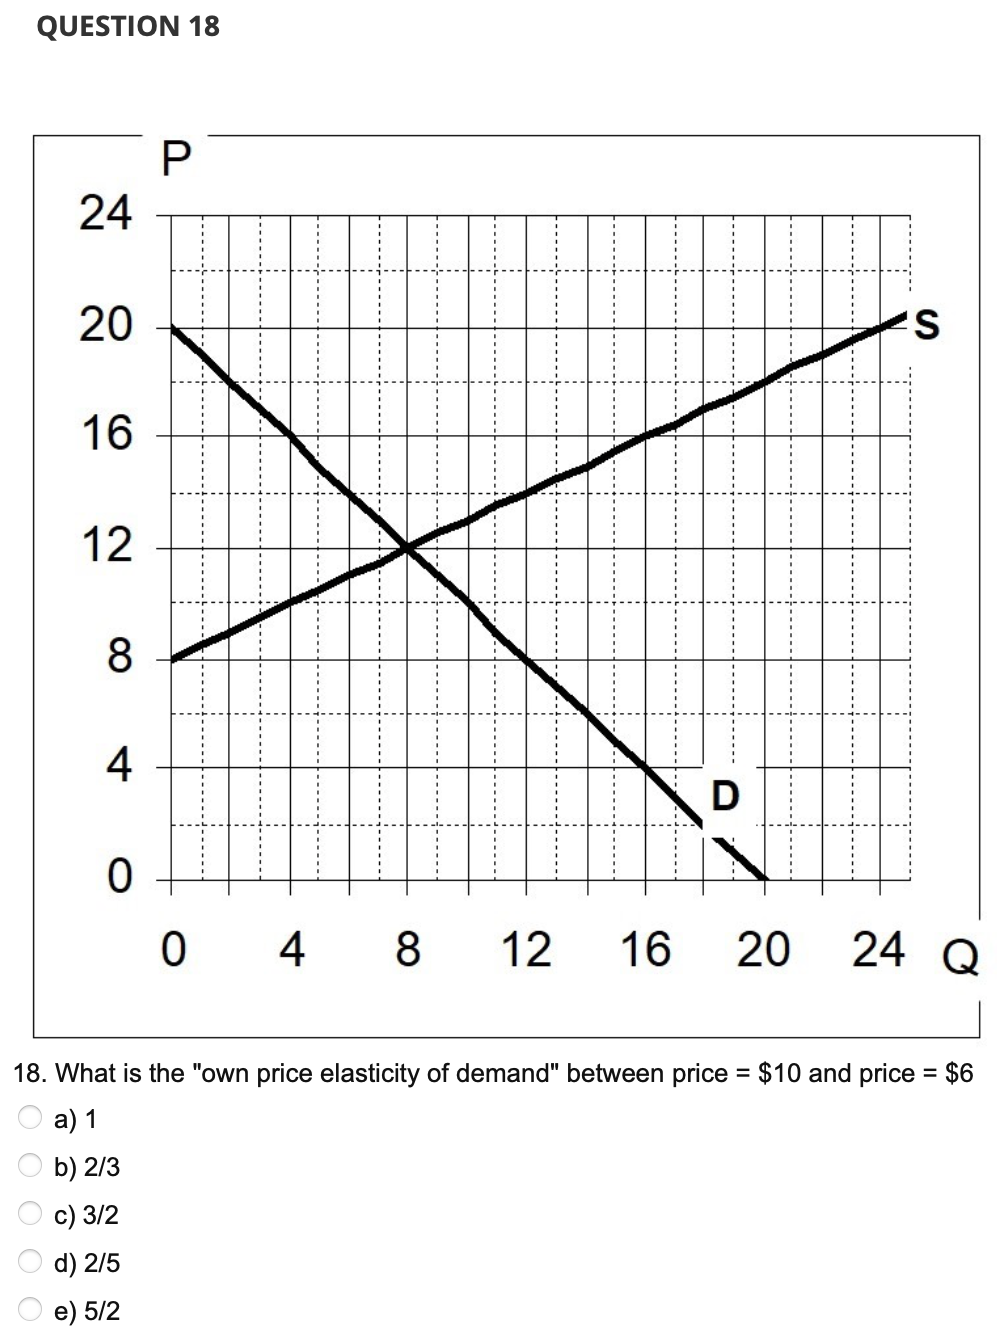 QUESTION 18
24
20
16
12
8
4
0
P
·‒‒‒‒‒‒‒‒‒‒
----------
048
--------
D
12 16 20
S
24 Q
18. What is the "own price elasticity of demand" between price = $10 and price = $6
a) 1
b) 2/3
c) 3/2
d) 2/5
e) 5/2